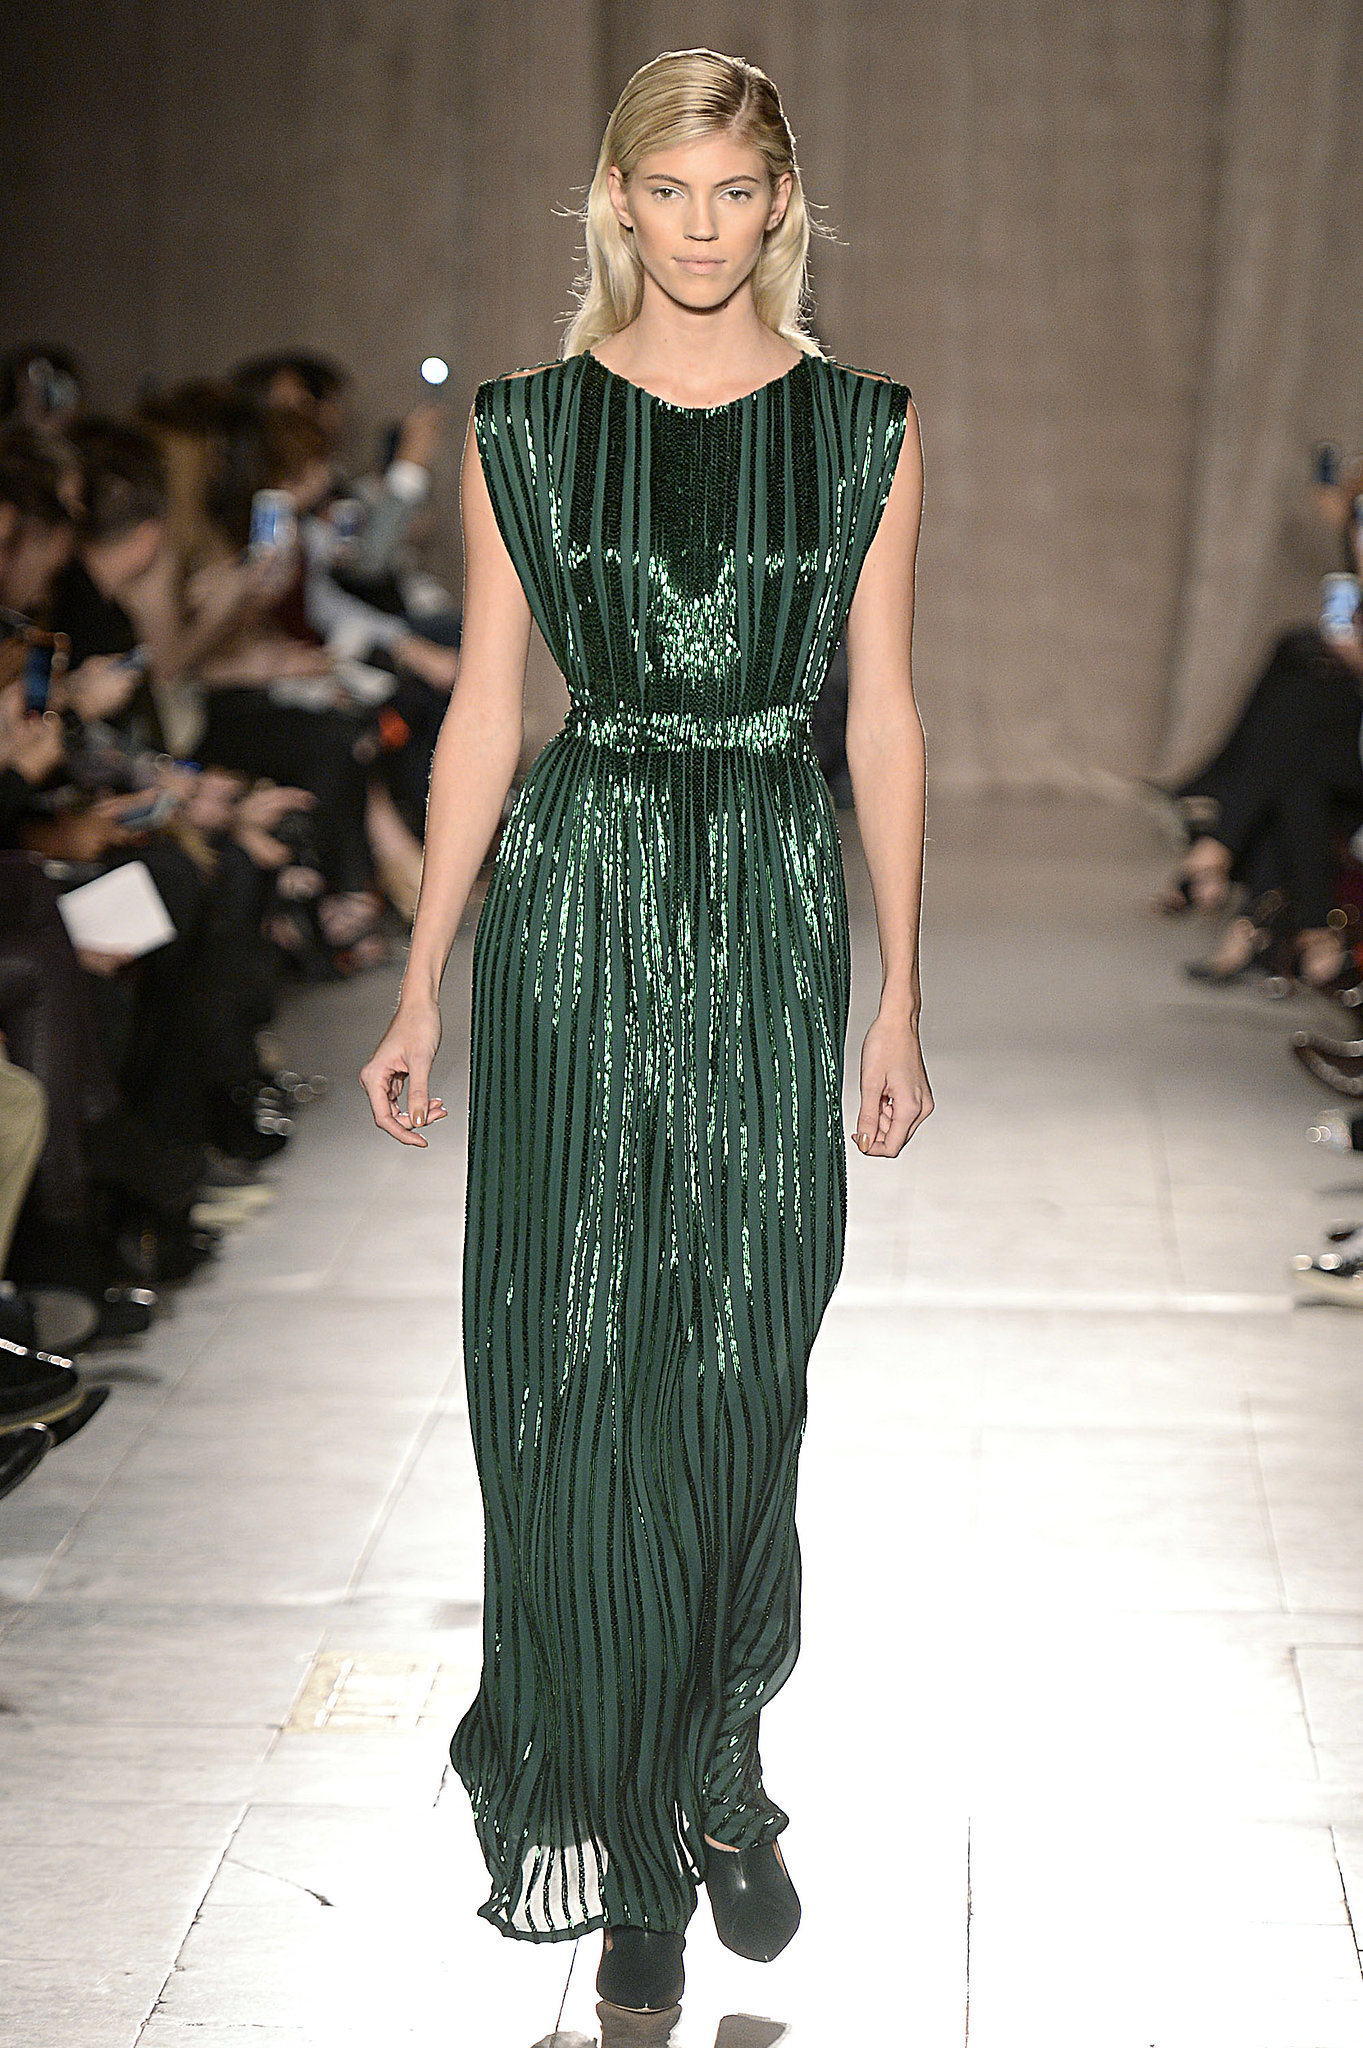 Zac Posen Fall 2015 | The Fall '15 Gowns That Should Walk Right Off the ...